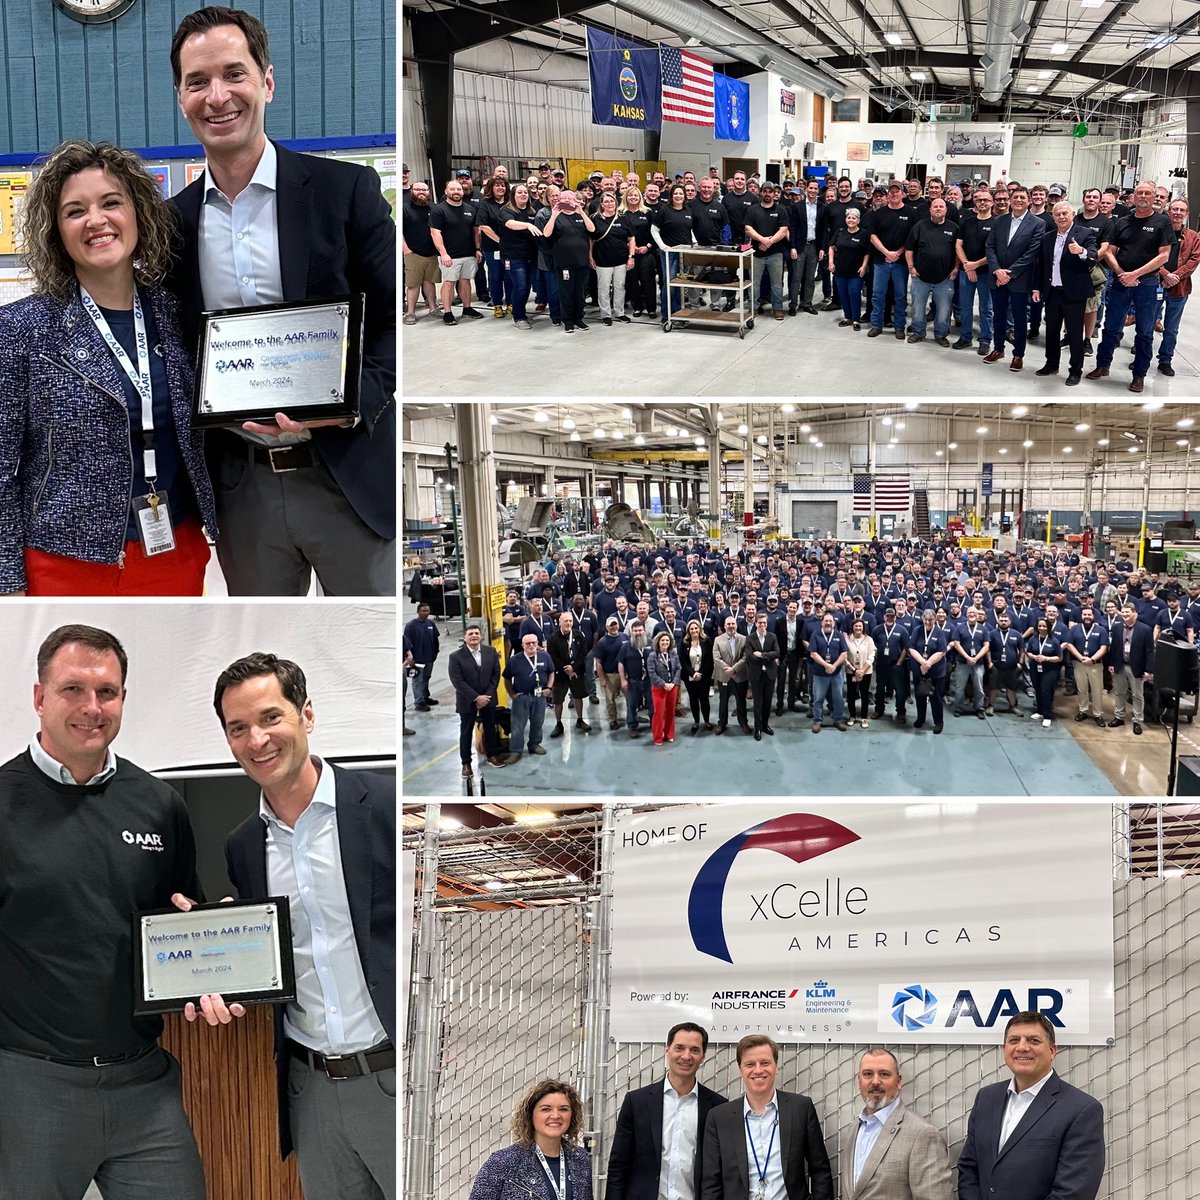 Last week I visited Hot Springs and Wellington to continue welcoming @AARCORP's newest Component Services team members. The energy and enthusiasm were incredible! #BestTeamInAviation